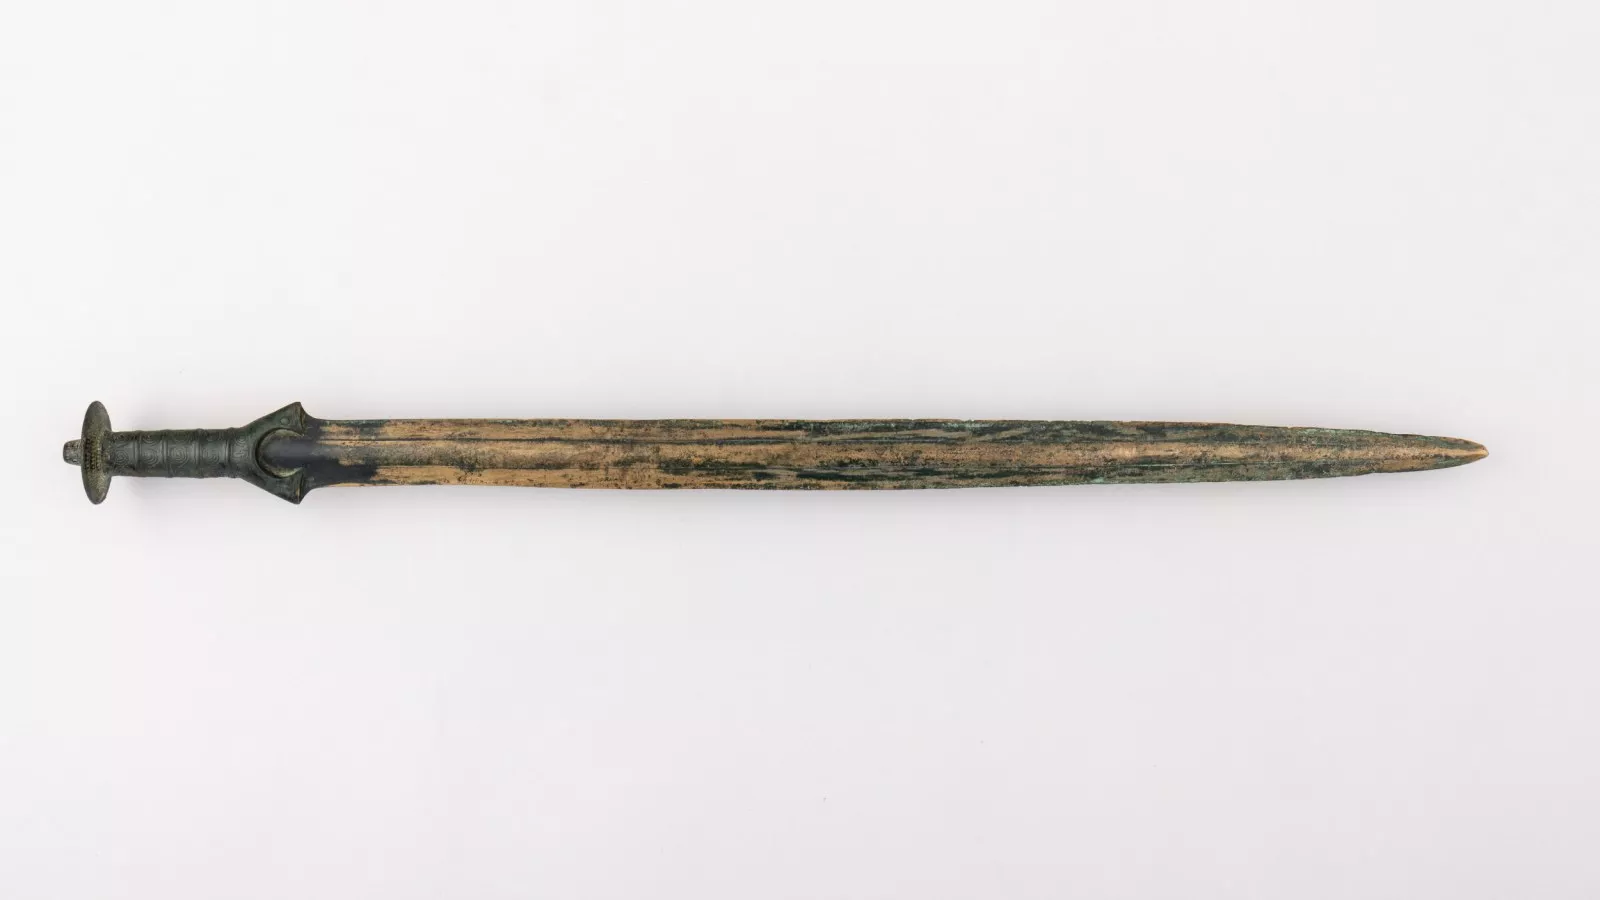 Was a 900 year old sword found in water?